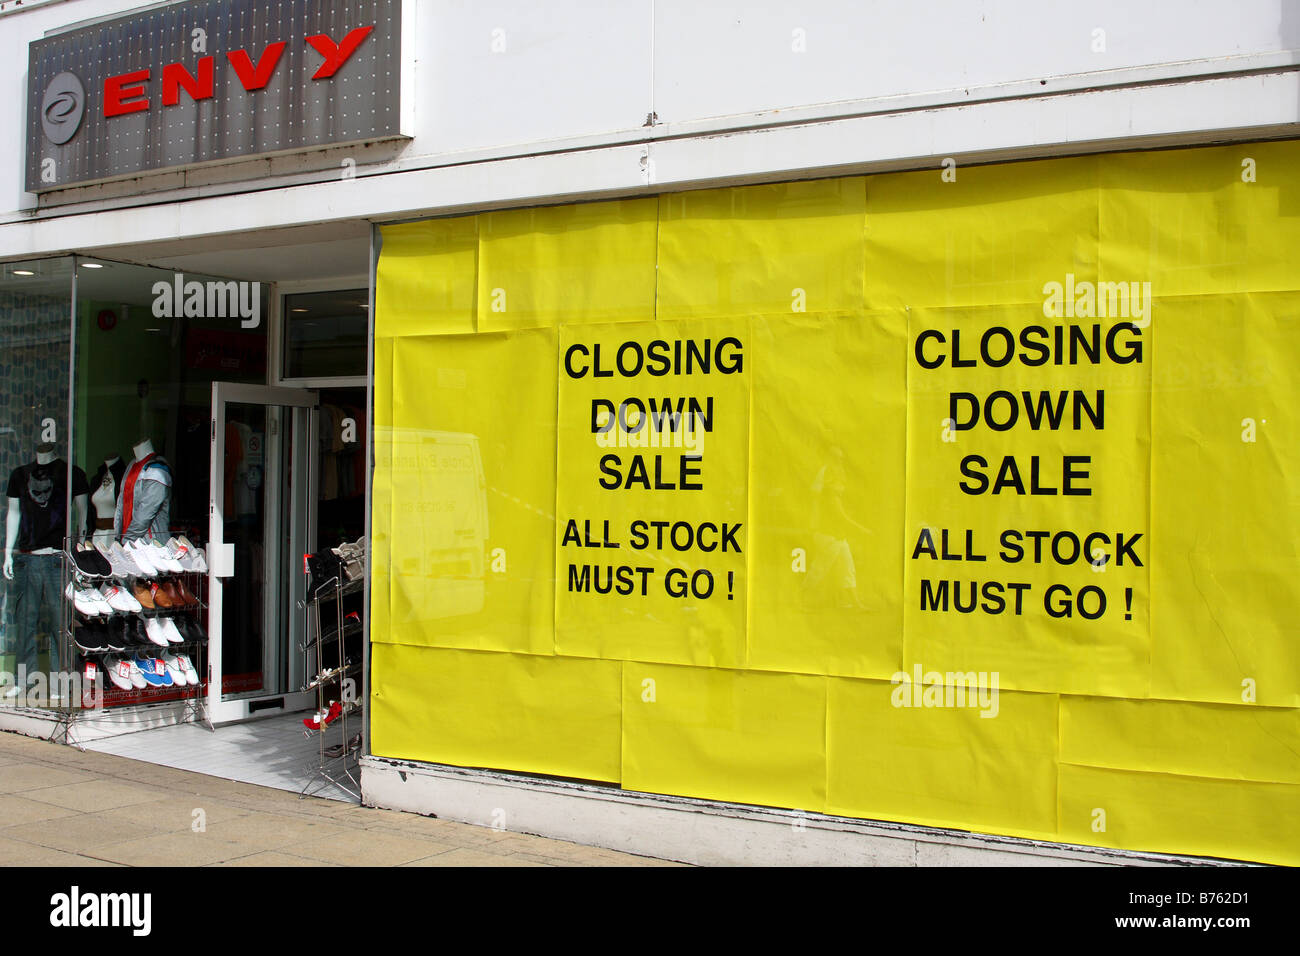 Closing down sale at the Envy fashion retail outlet in Lincoln, Lincolnshire England, U.K. Stock Photo